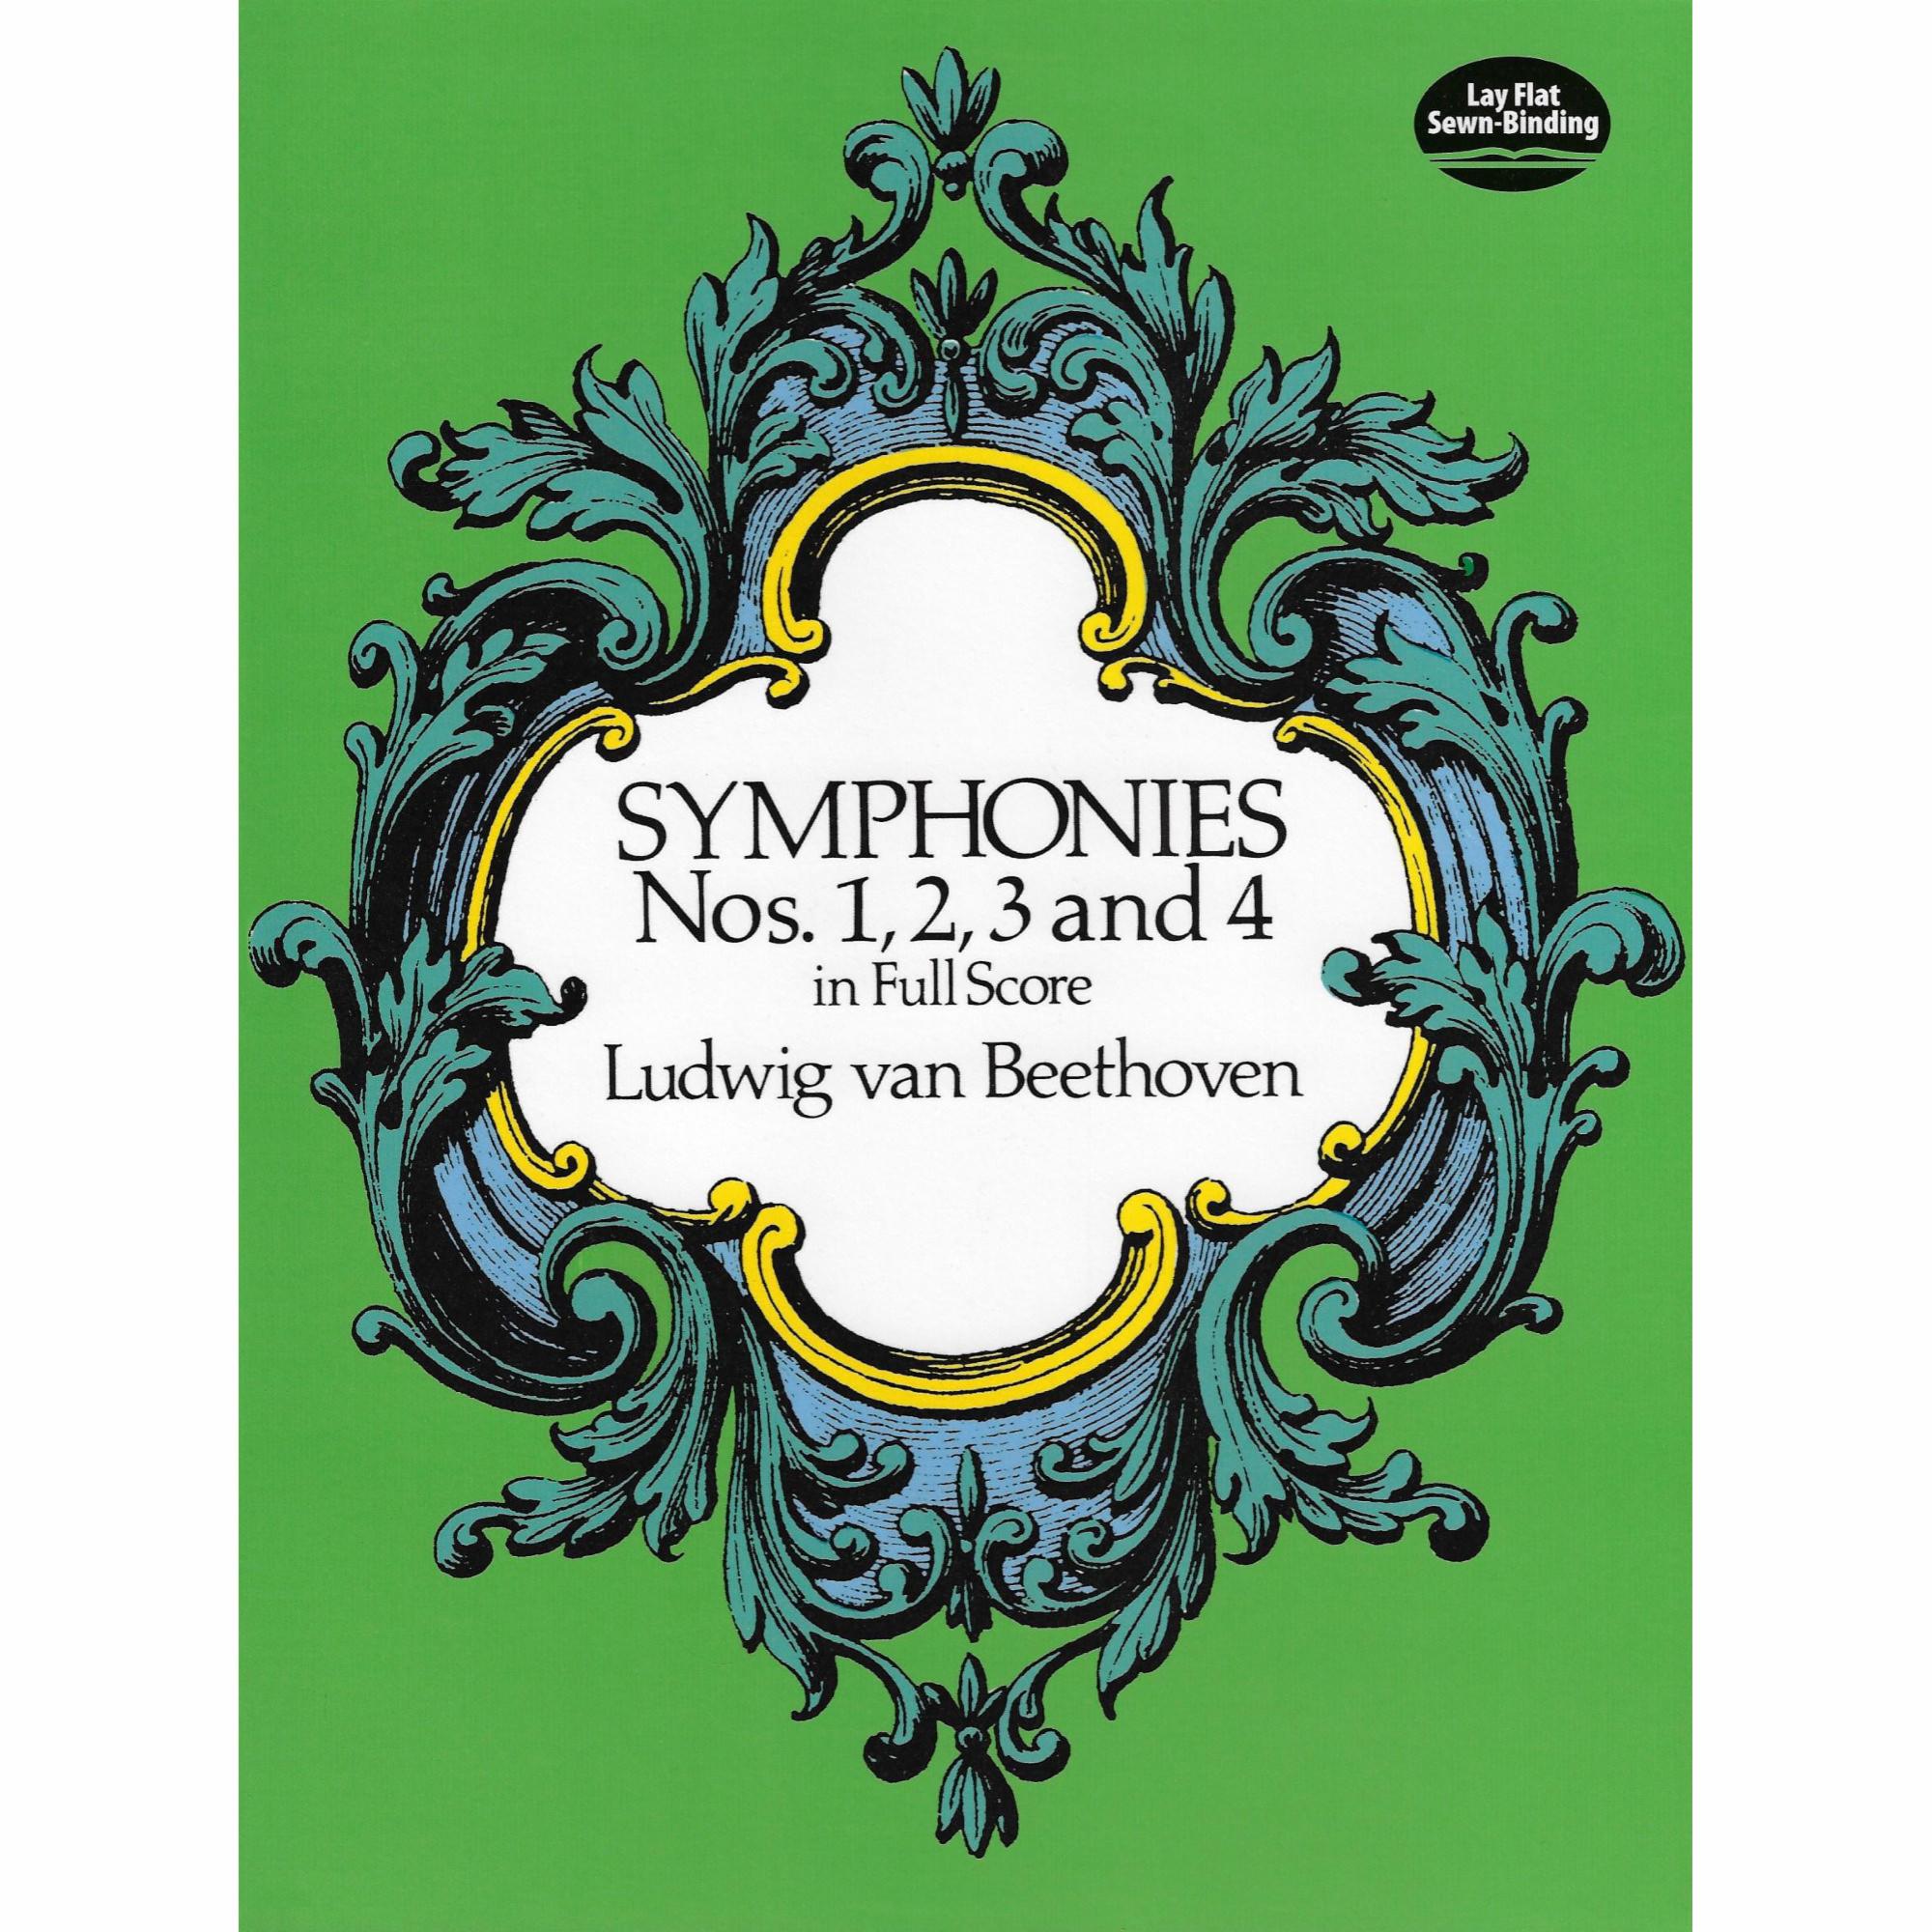 Beethoven -- Symphonies Nos. 1, 2, 3 and 4 in Full Score